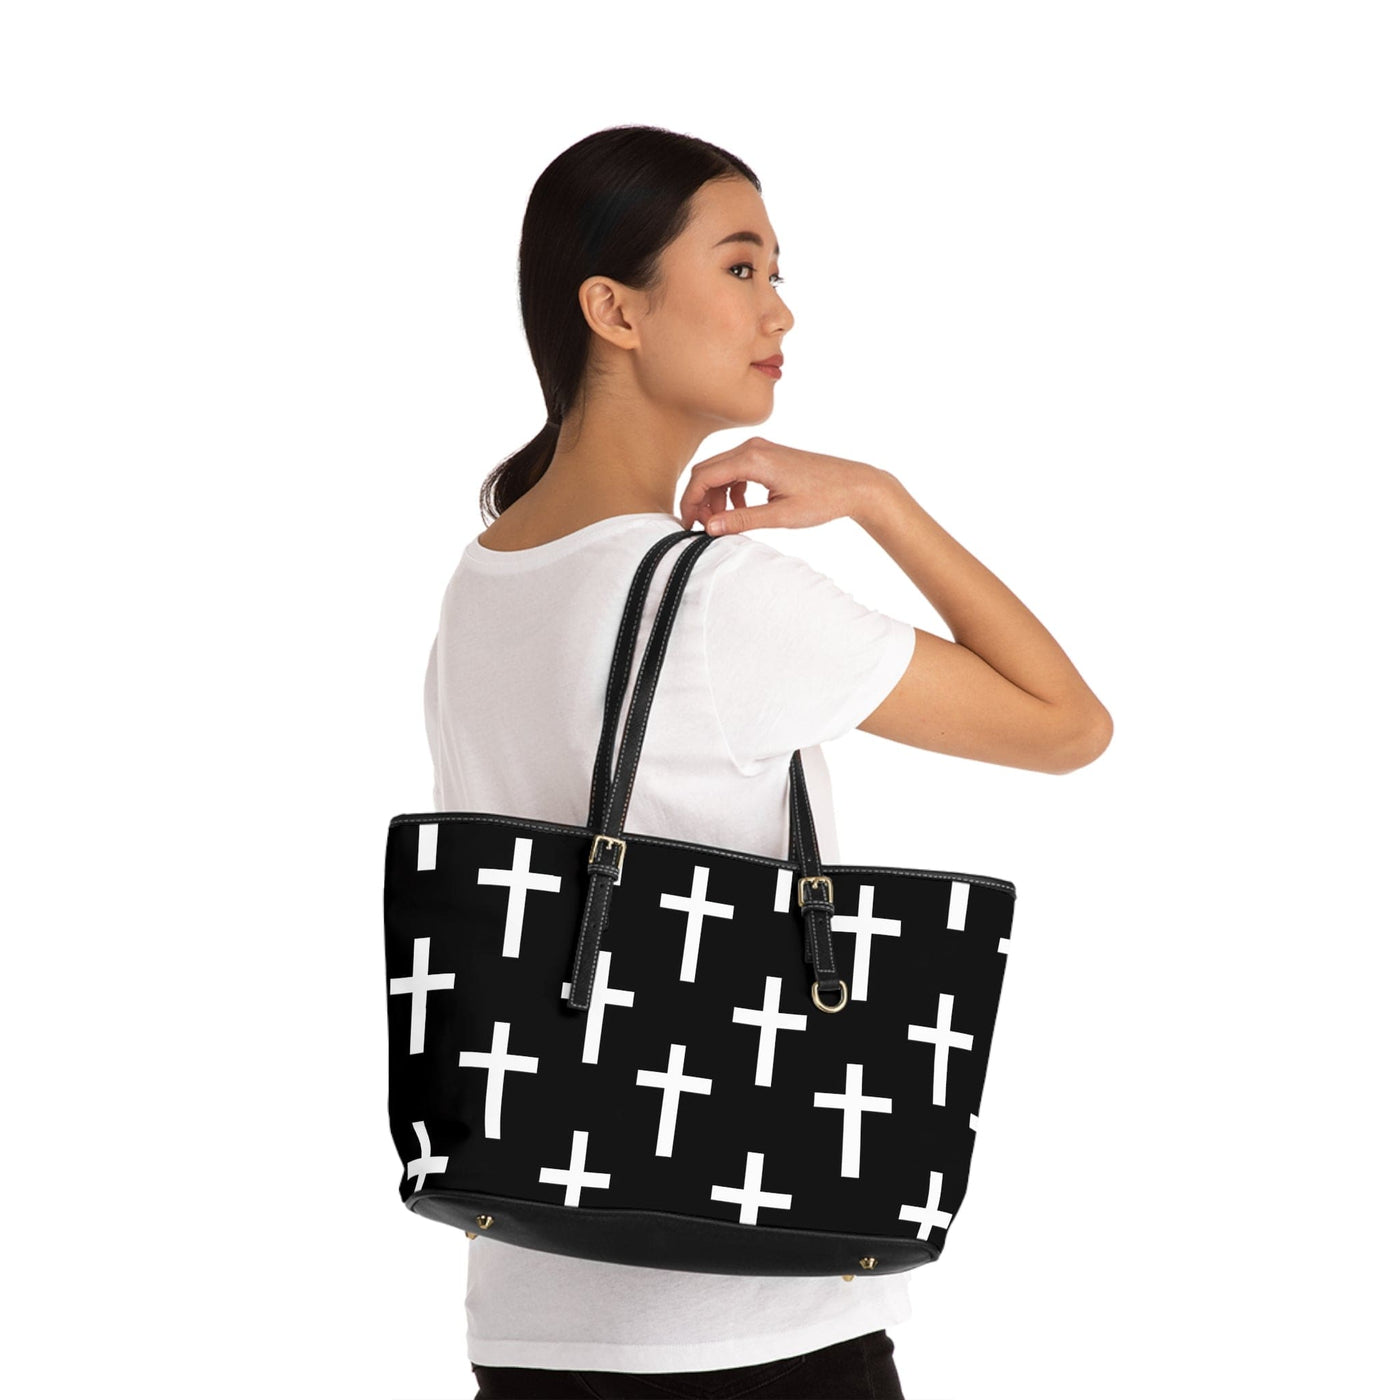 Large Leather Tote Shoulder Bag Black And White Seamless Cross Pattern - Bags